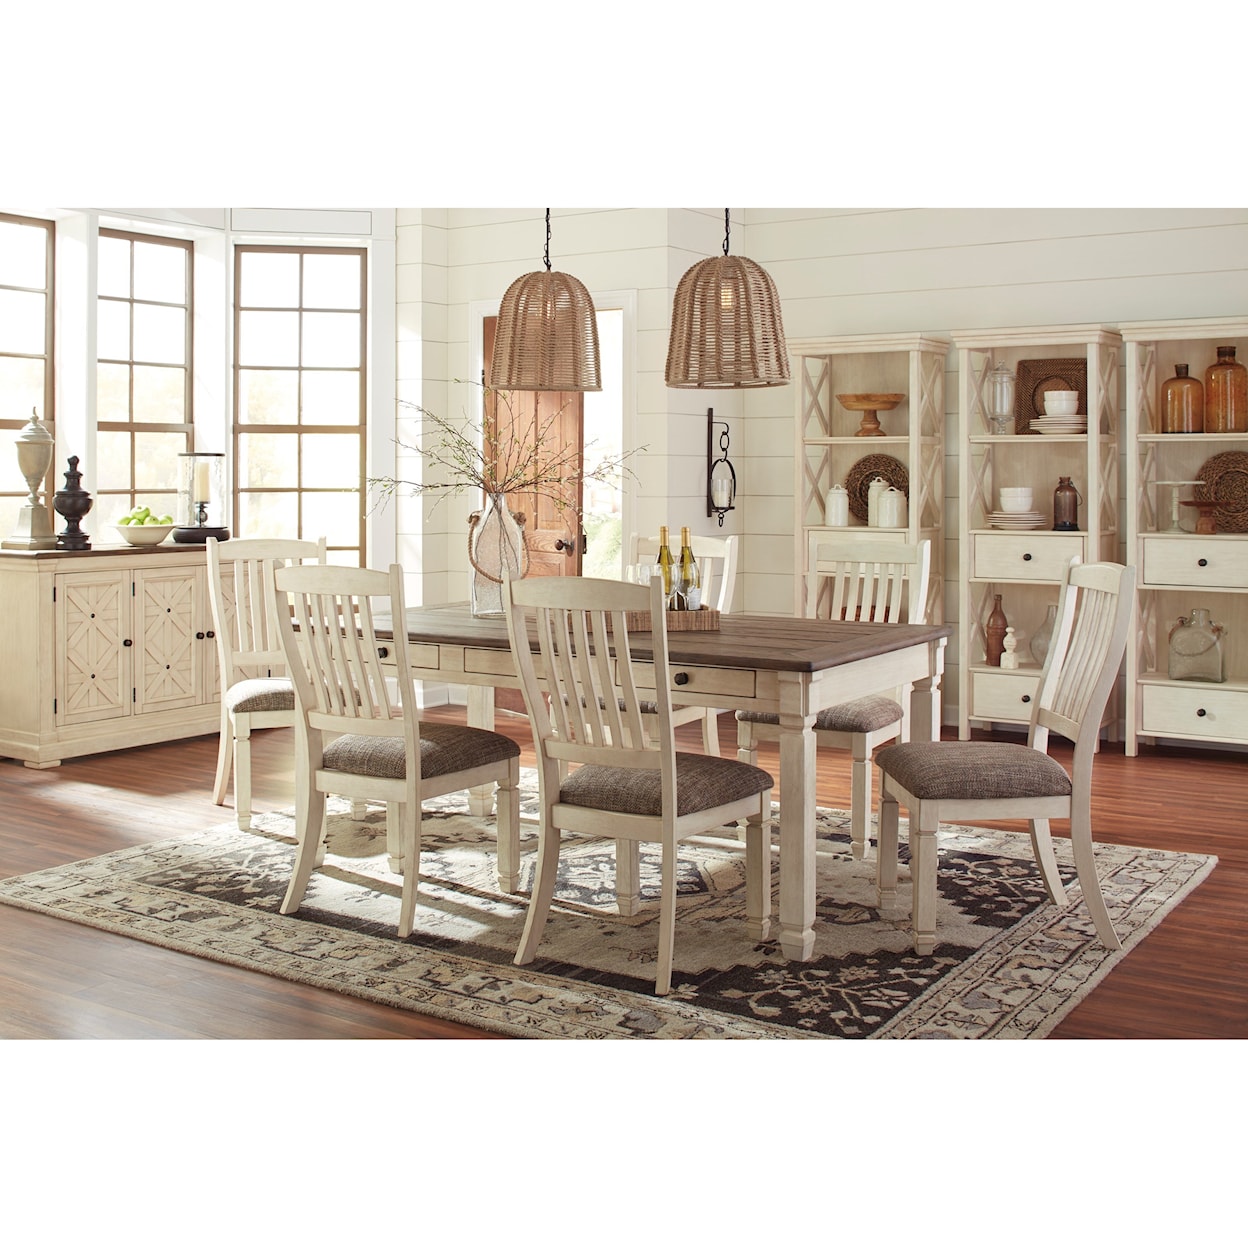 Signature Design by Ashley Furniture Bolanburg 7-Piece Table and Chair Set